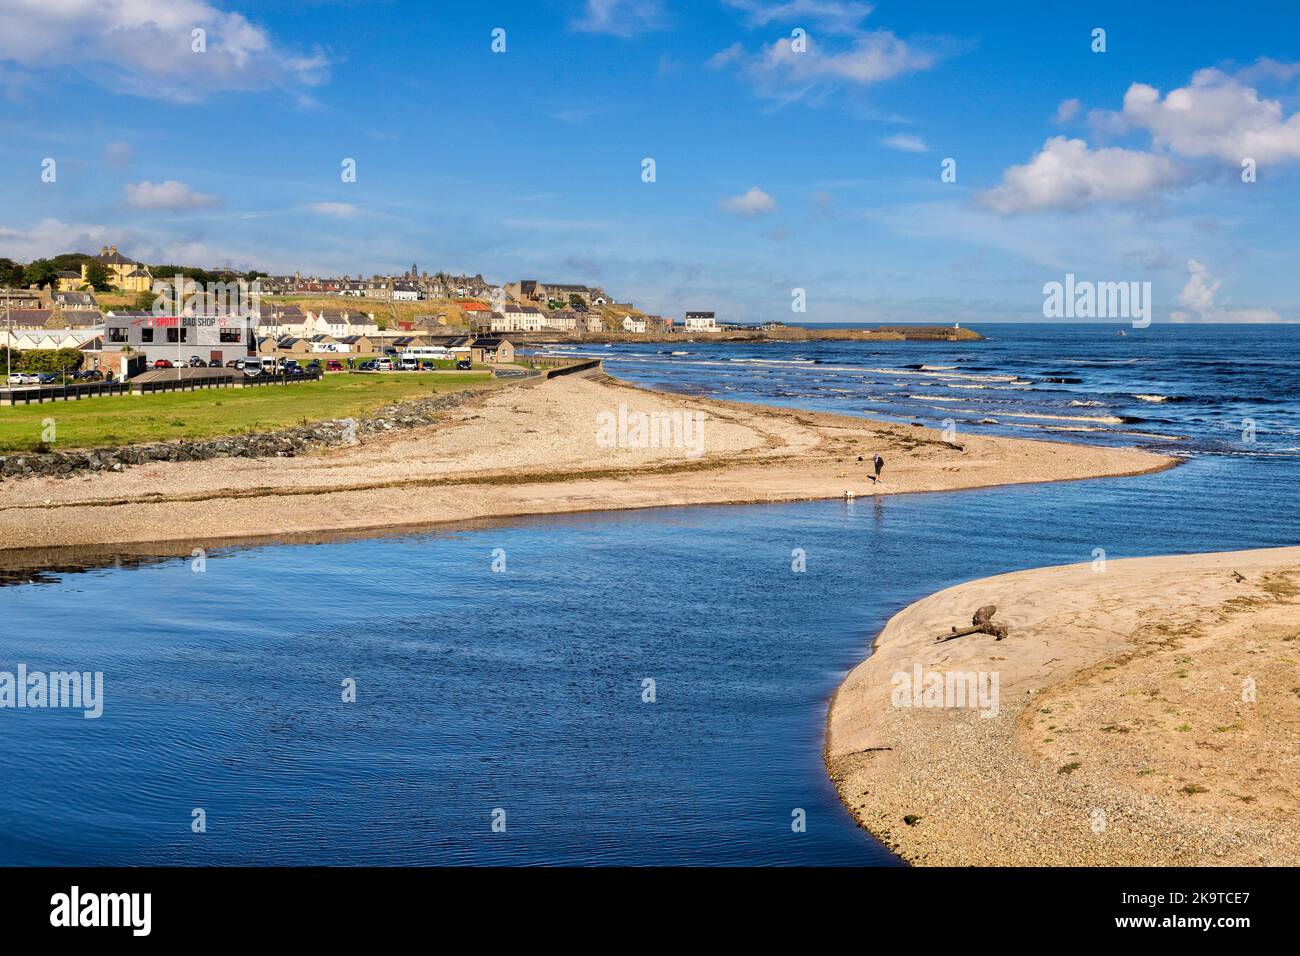 10 September 2022: Banff, Scotland, UK - The Scottish coastal town of Banff, Aberdeenshire, and the River Deveron as it meets the sea. Stock Photo